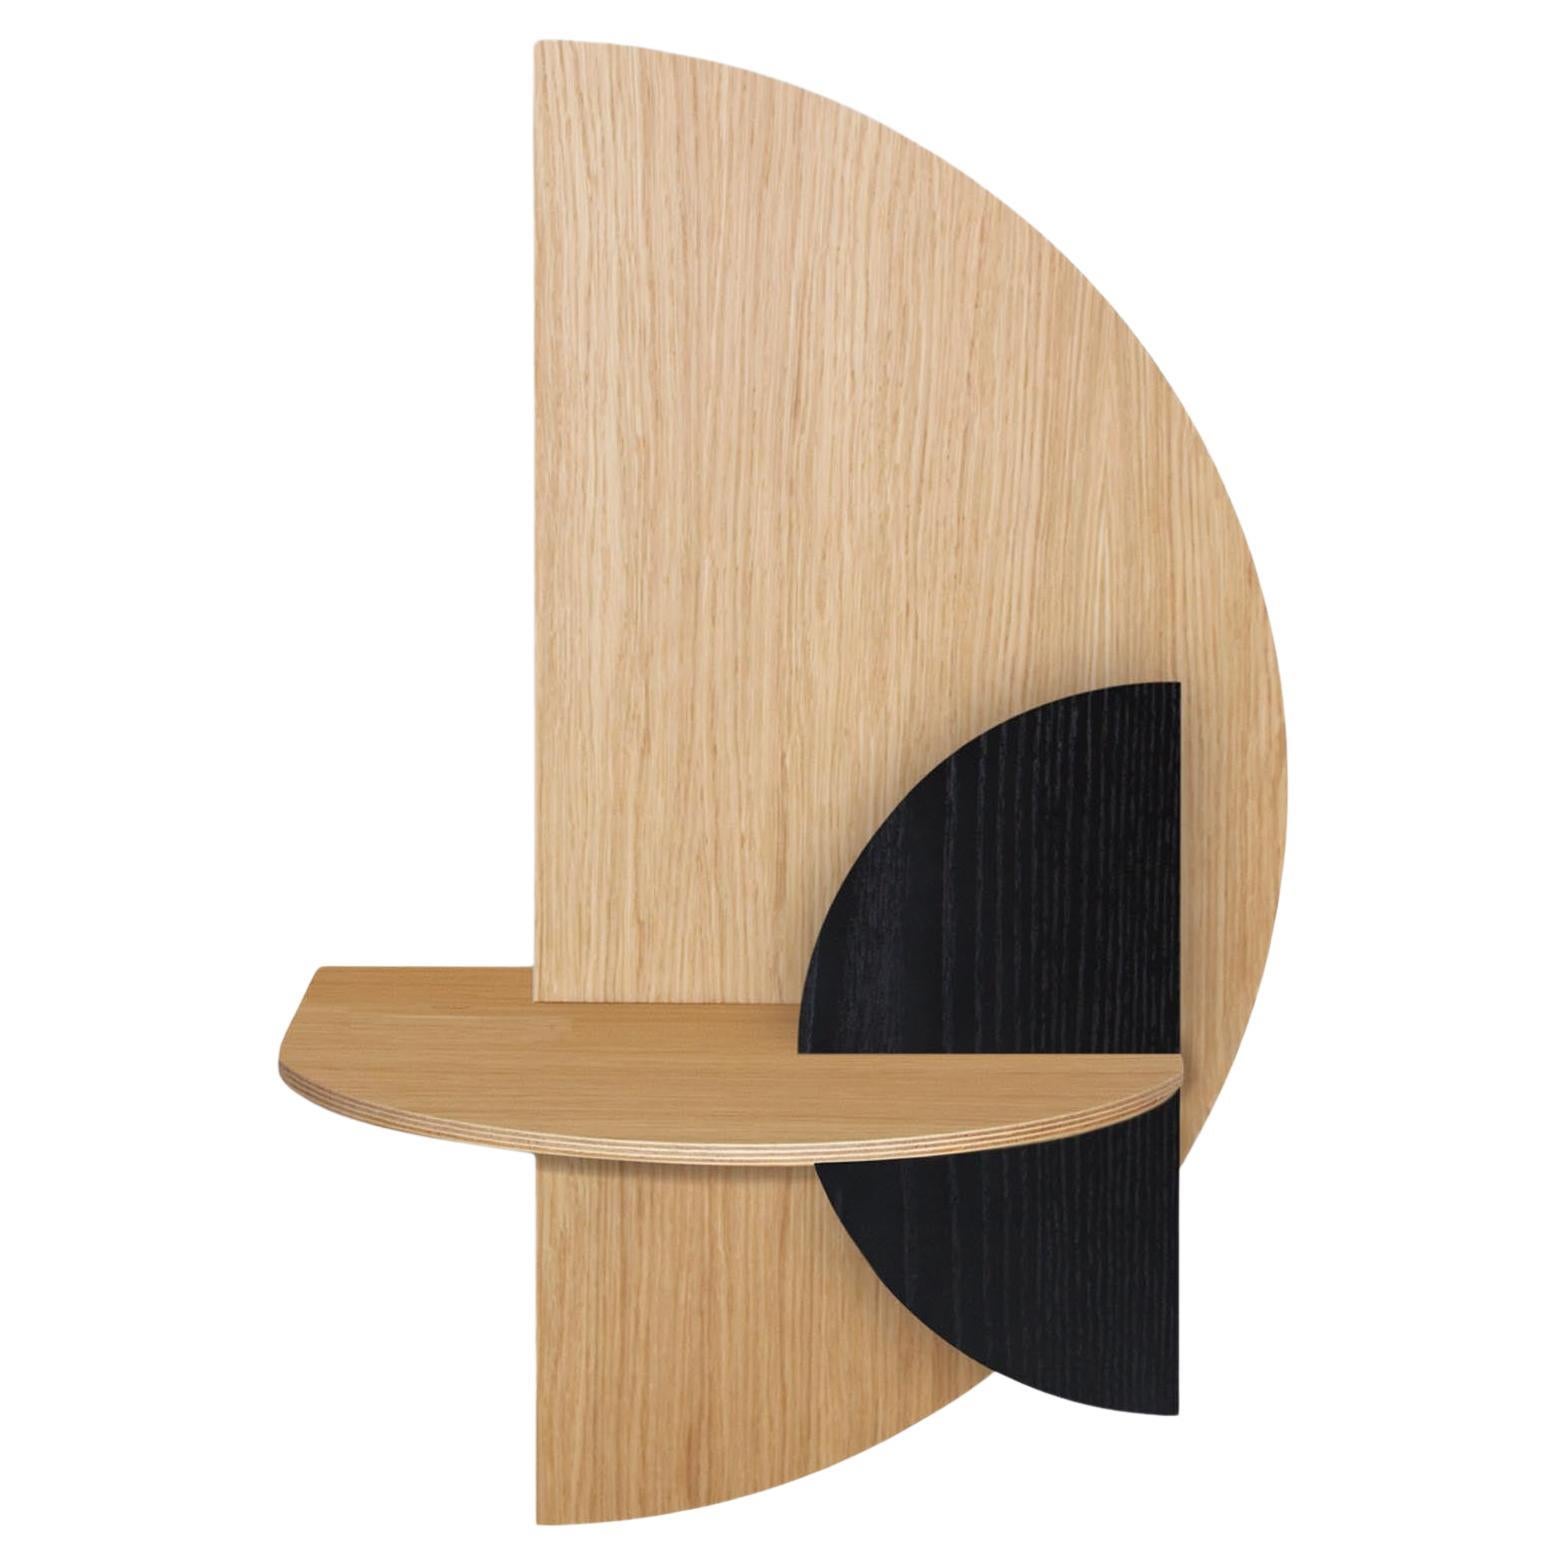 Alba L Bedside Table Semicircle Oak and Black Moon For Sale